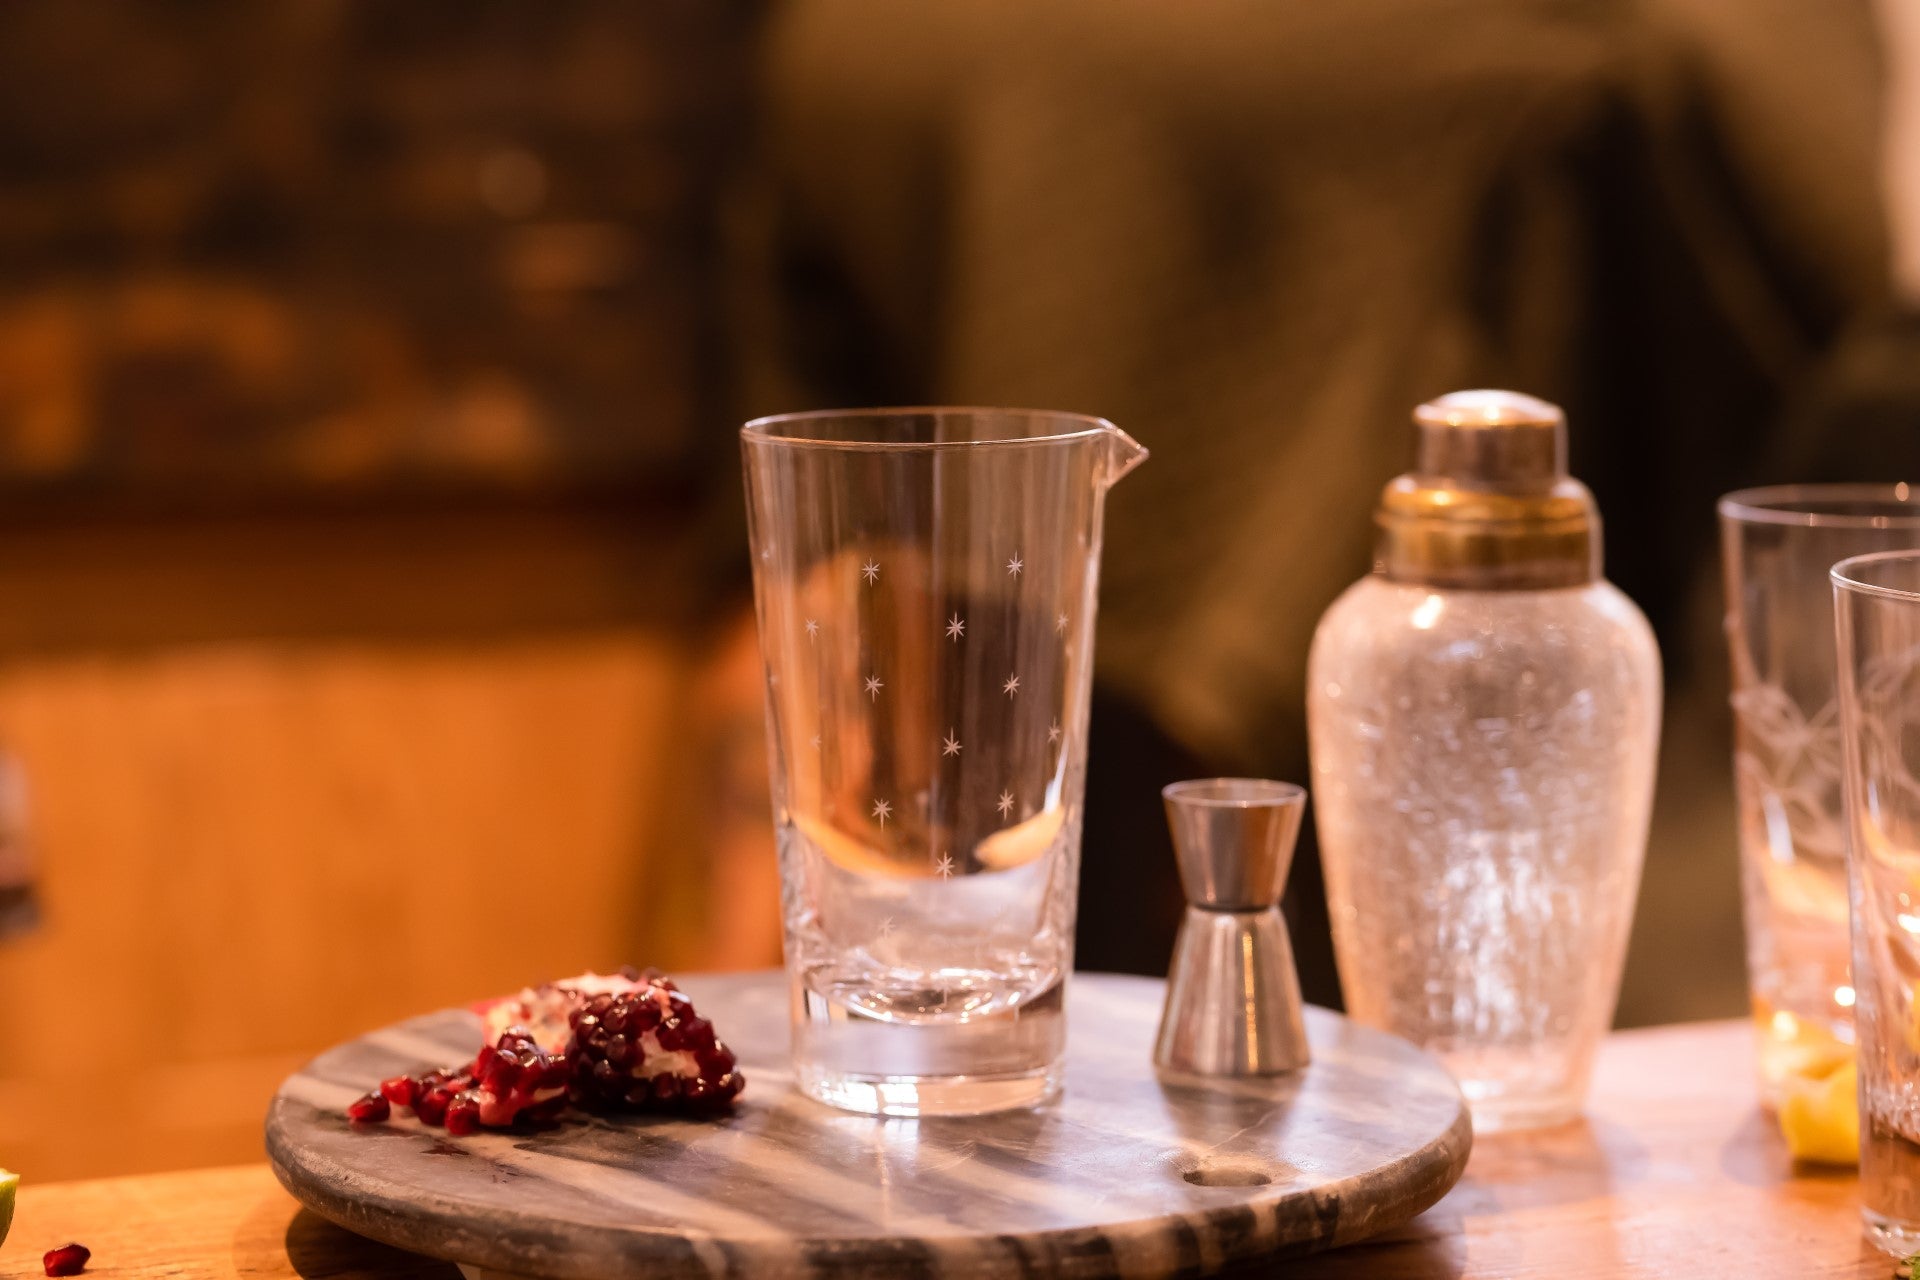 A crystal mixing glass with a stars design sitting on a board next to a cocktail shaker and glasses.